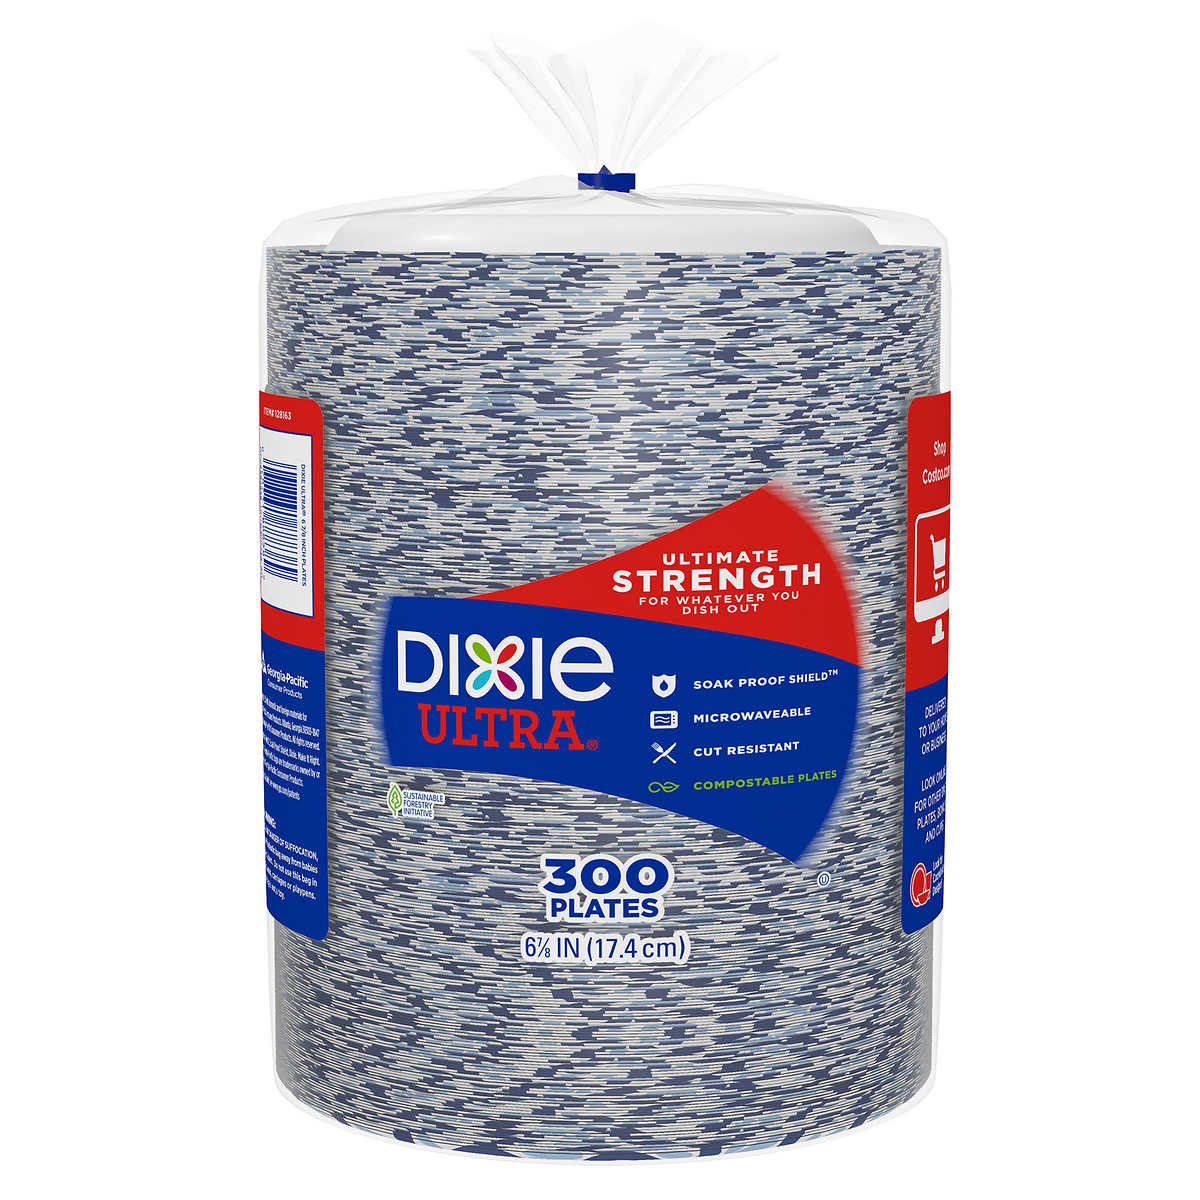 Dixie Ultra 6-7/8 Paper Plate, 300-count